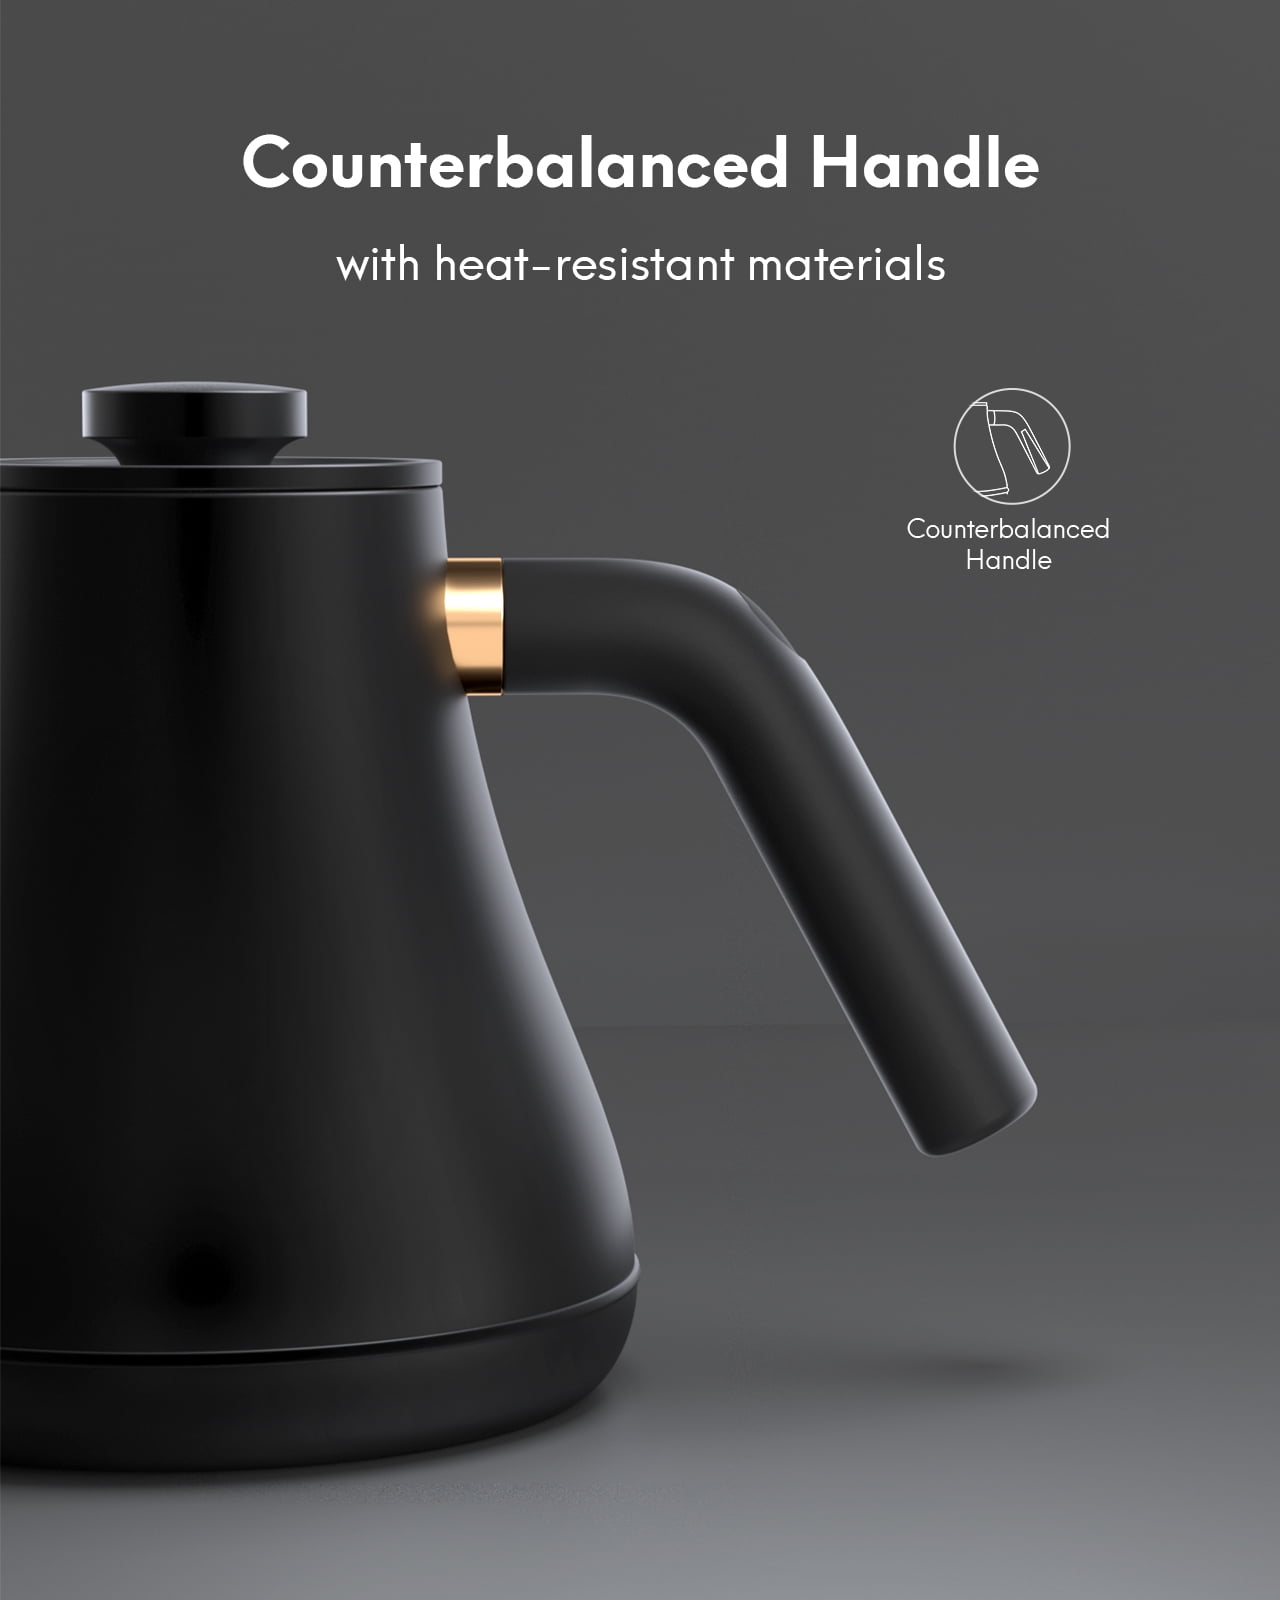 Whall Gooseneck Electric Kettle - Tea/Coffee Kettle with LED Display, Button Controls, Stainless Steal Inner, 1200W Fast Heating (Black), Size: 10.2